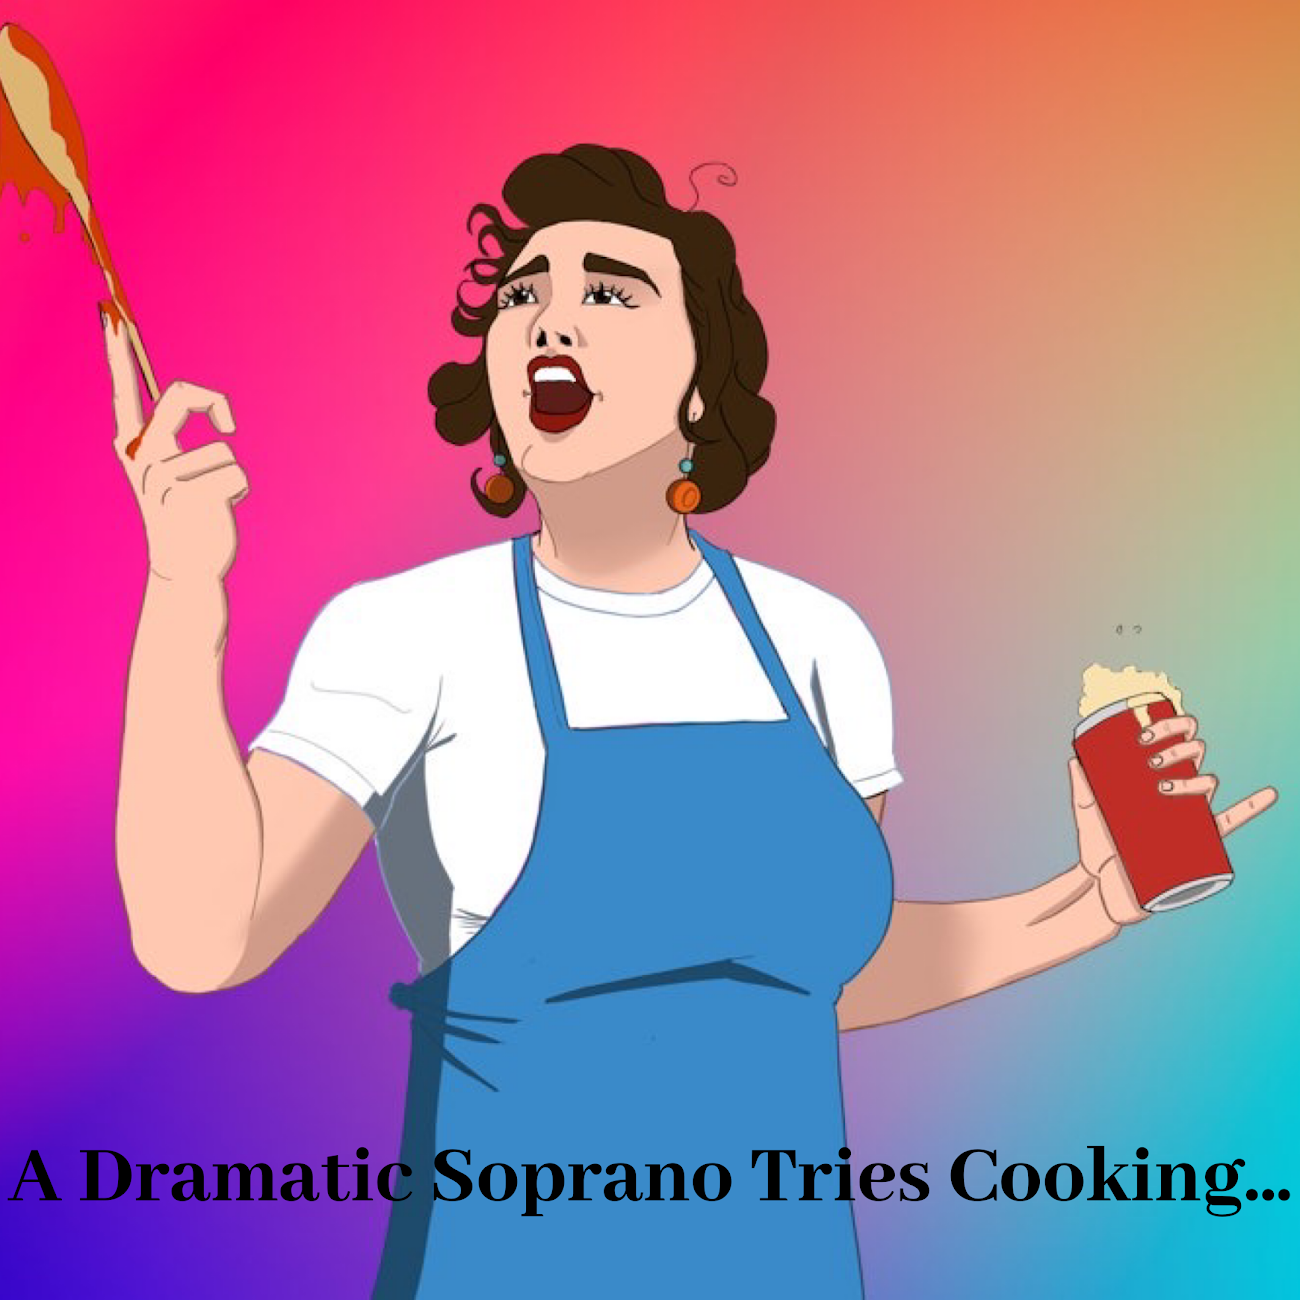 A Dramatic Soprano Tries Cooking...